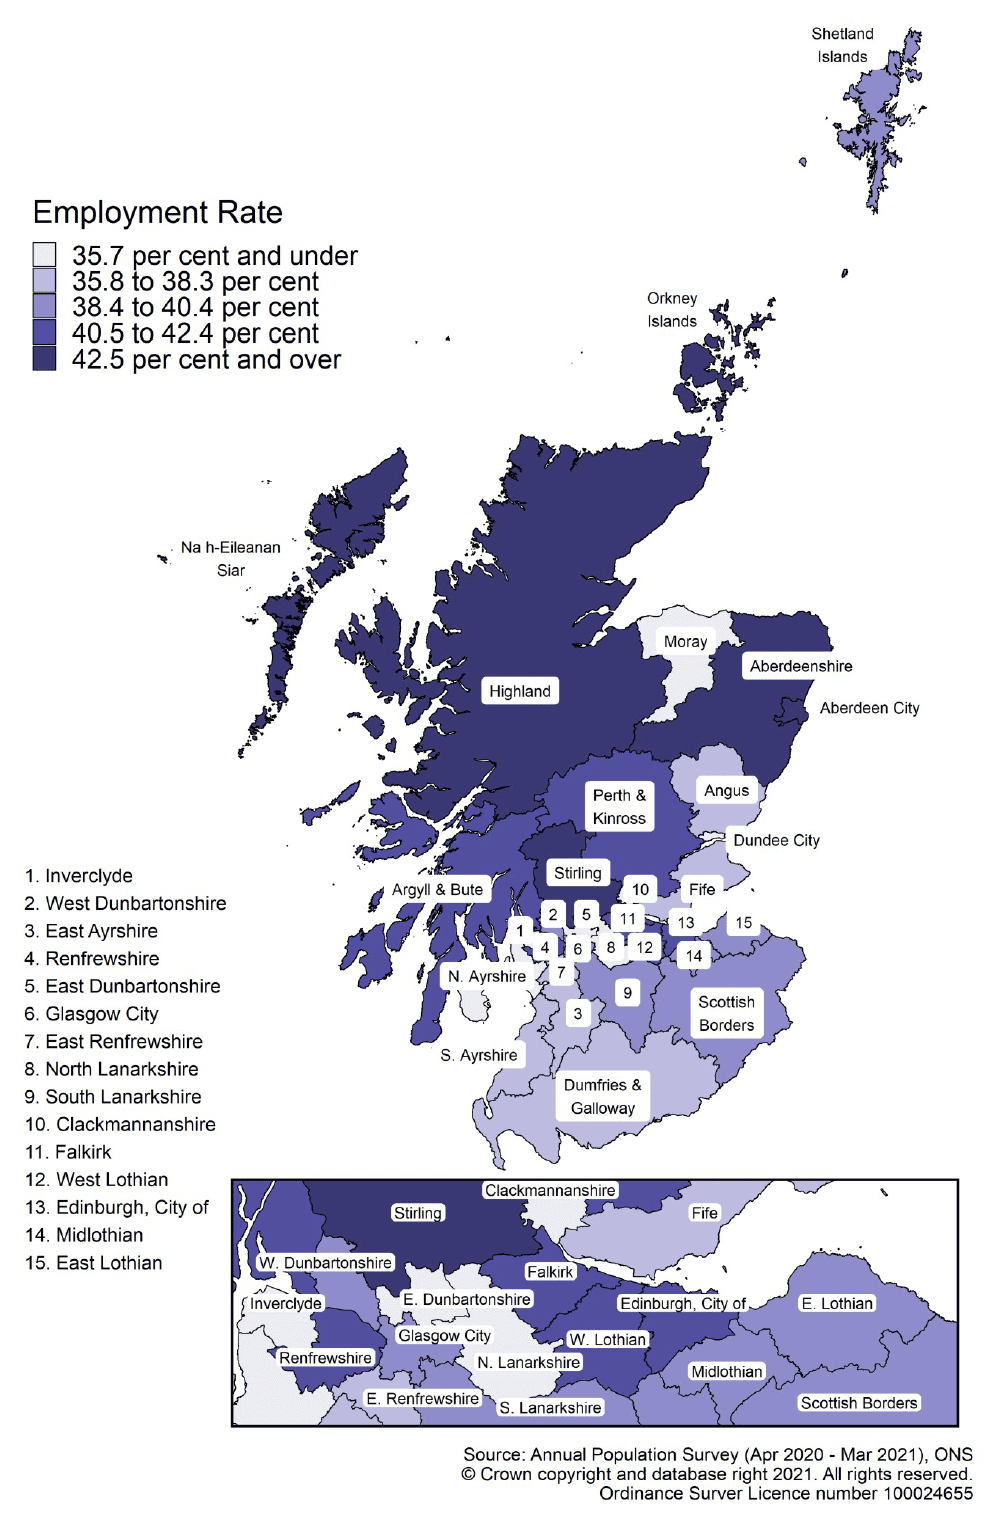 Map of Scotland showing employment rate ranges by local authority area for ages 50 and over in April 2020-March 2021